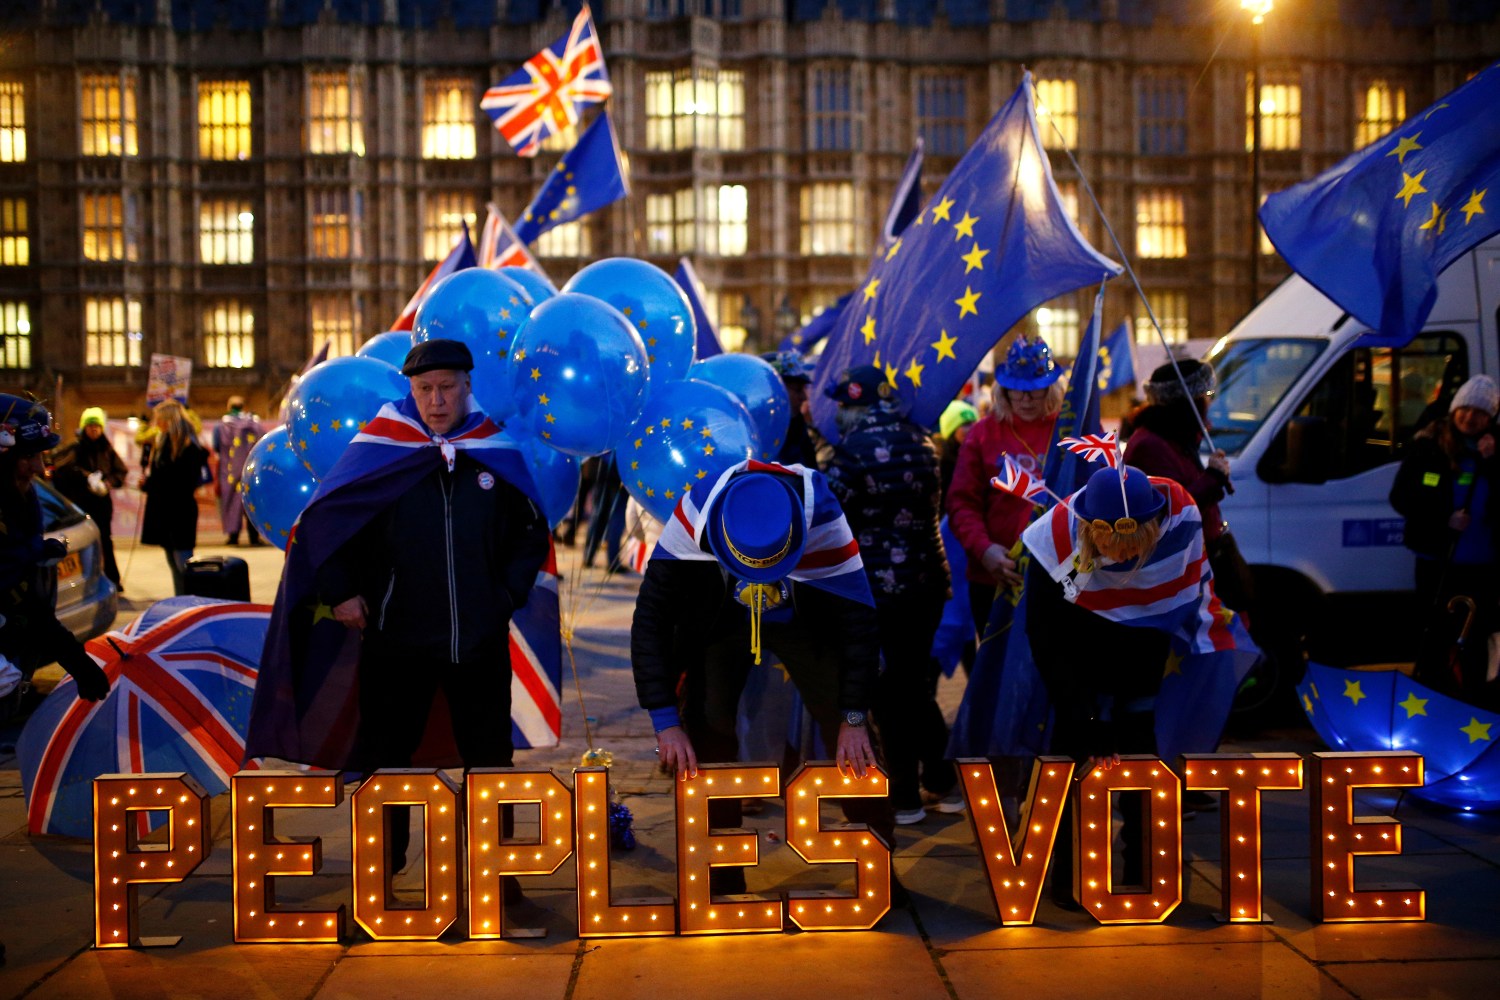 Anti-Brexit protesters stand next to an illuminated sign outside the Houses of Parliament in London, Britain, December 10, 2018. REUTERS/Henry Nicholls     TPX IMAGES OF THE DAY - RC18D2DB4050